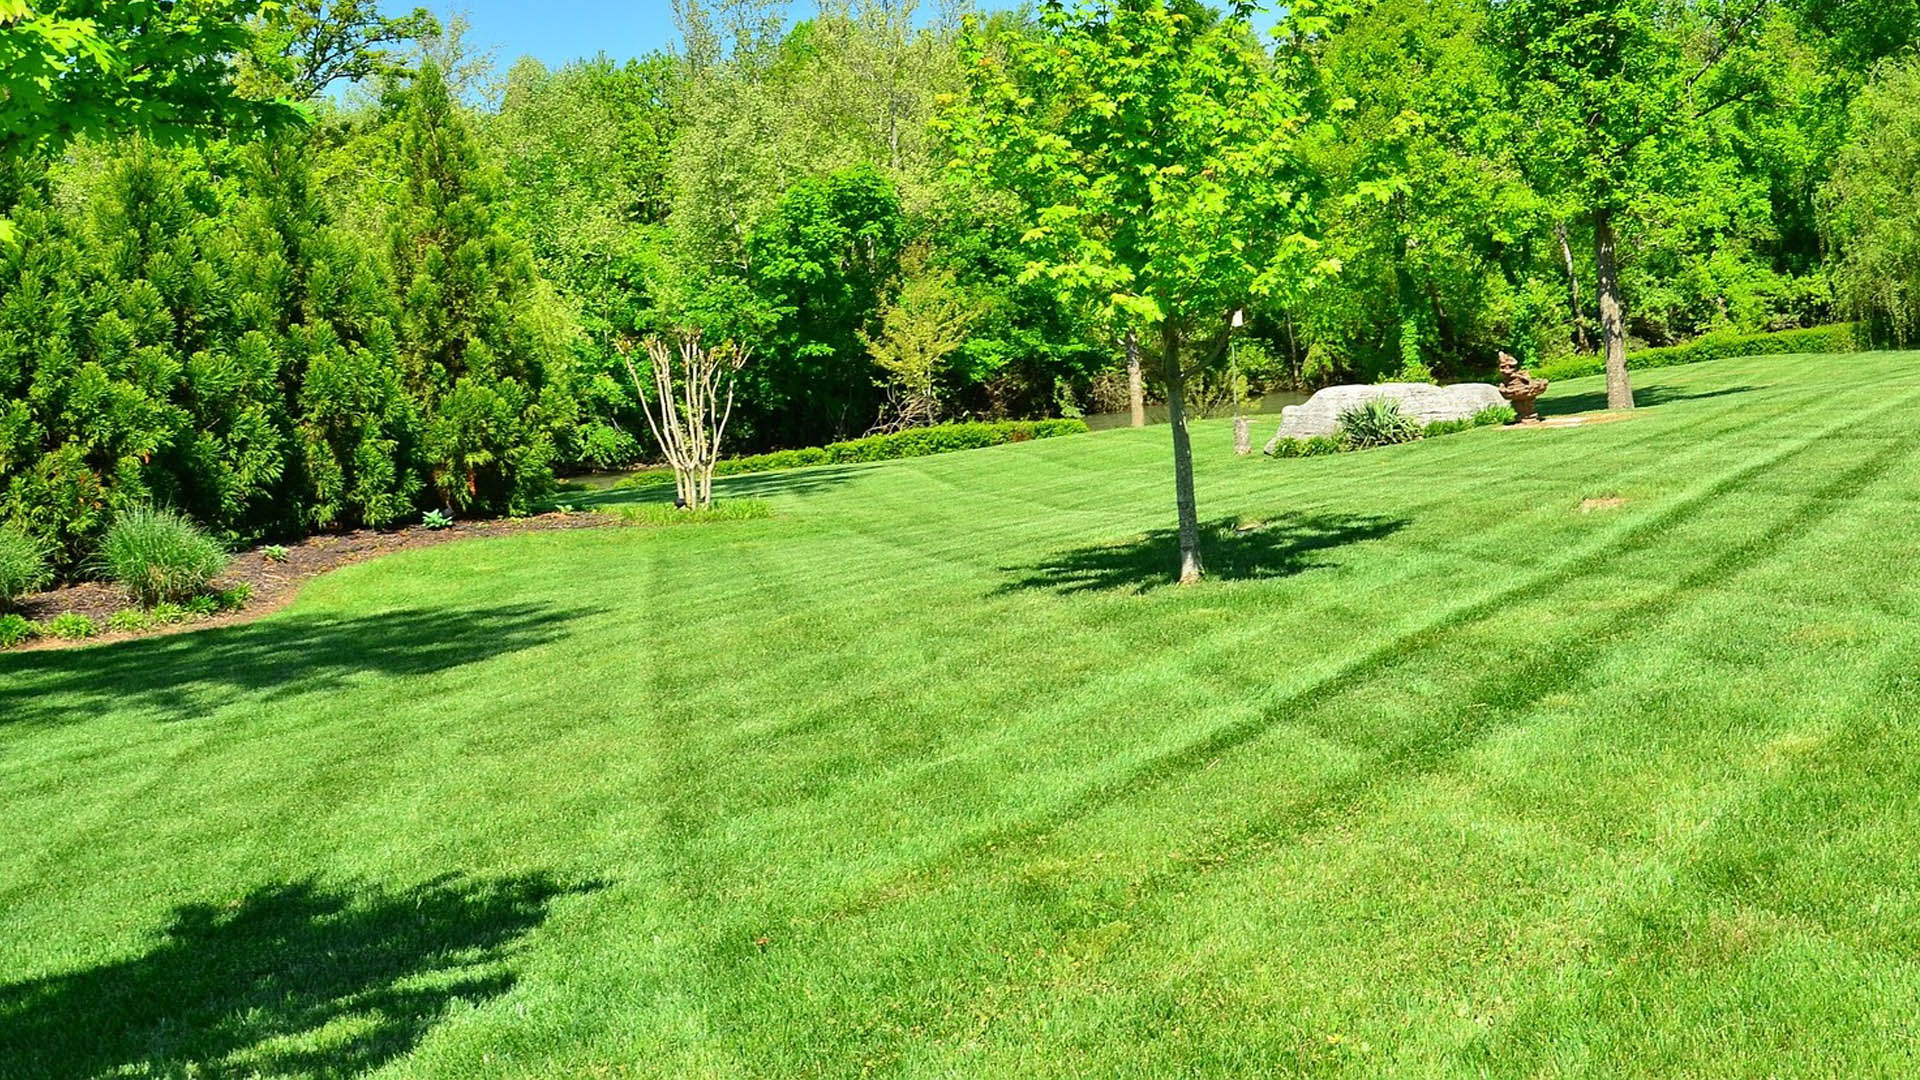 Lawn mowed with striping in Lexington, KY.